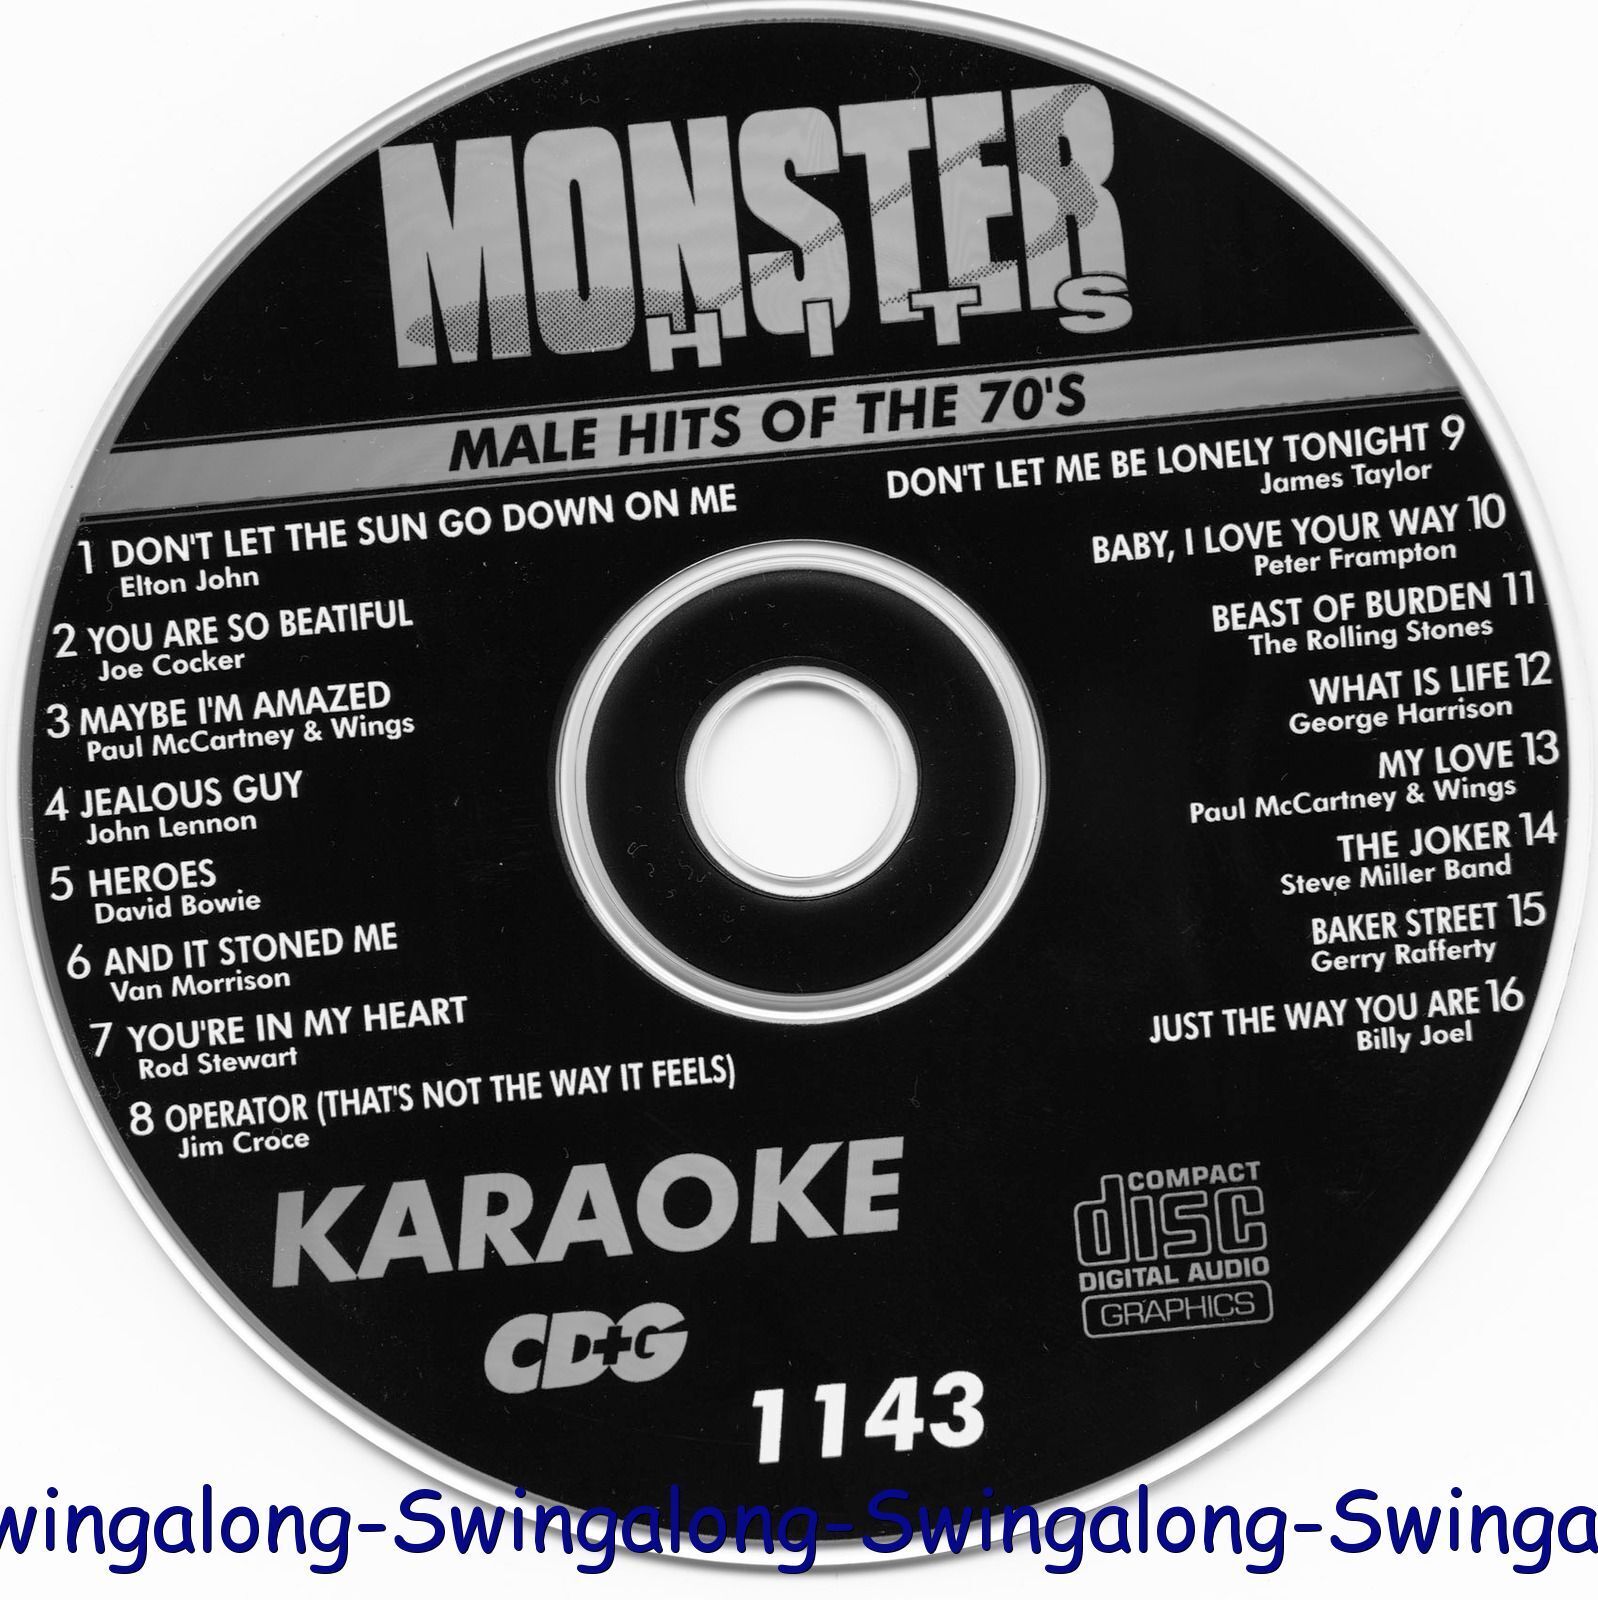 Male Hits Of The 70's Karaoke Cd+g Monster Hits Vol-1143 New In White Sleeve